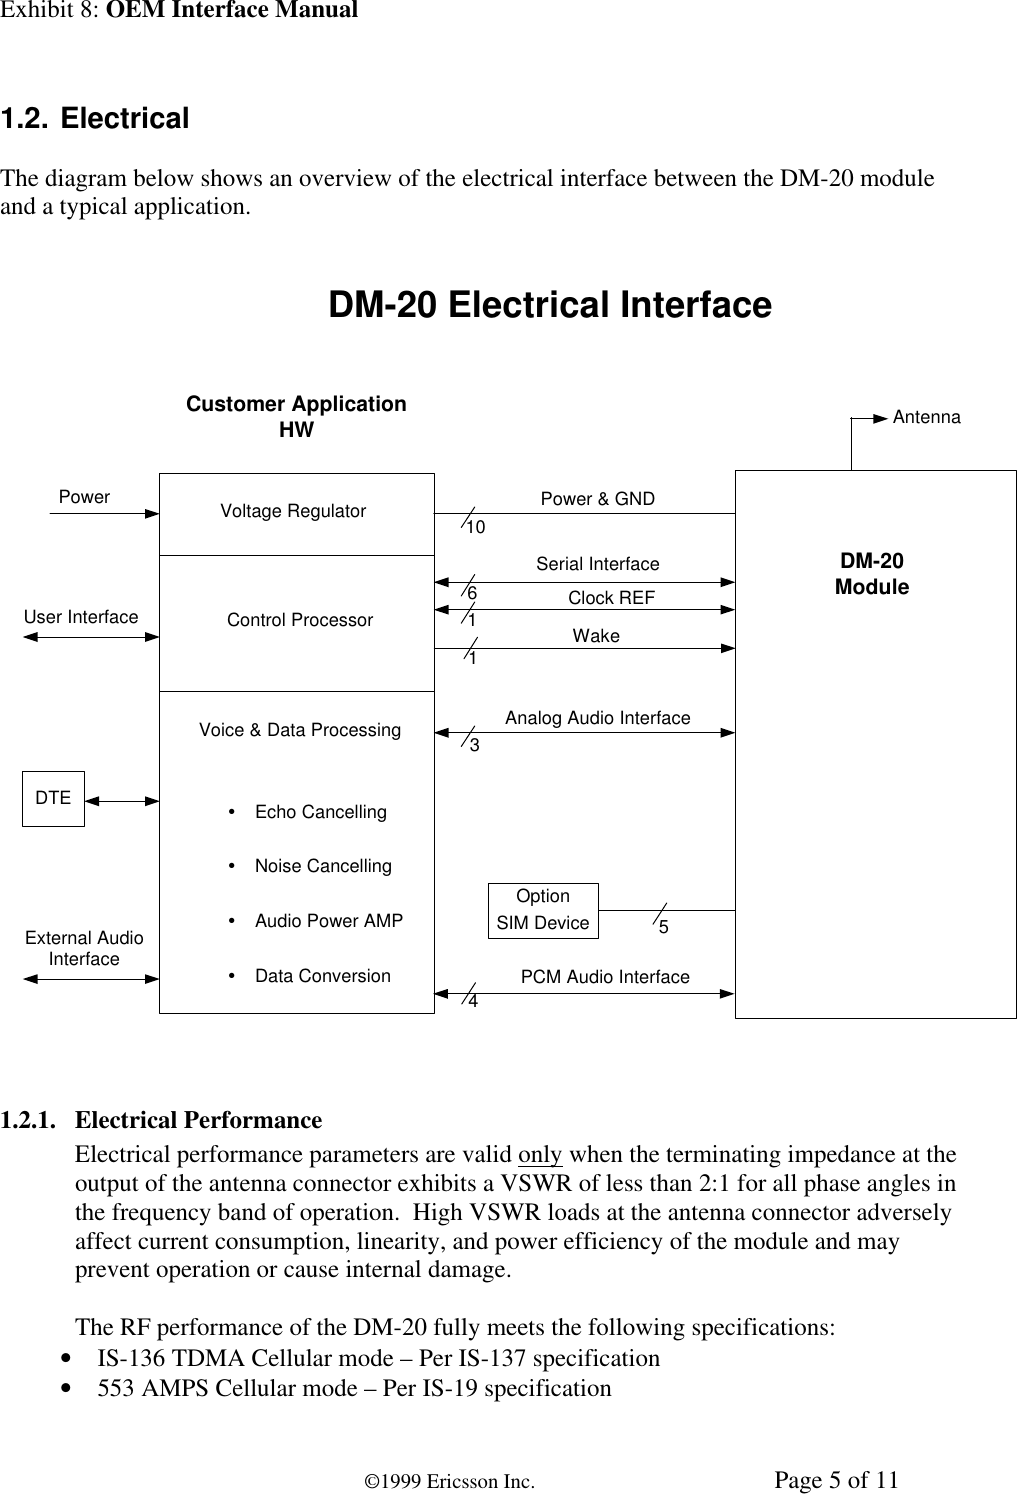 Exhibit 8: OEM Interface Manual©1999 Ericsson Inc. Page 5 of 111.2. ElectricalThe diagram below shows an overview of the electrical interface between the DM-20 moduleand a typical application.DM-20 Electrical InterfaceCustomer ApplicationHWVoltage RegulatorControl ProcessorVoice &amp; Data ProcessingŸEcho CancellingŸNoise CancellingŸAudio Power AMPŸData ConversionDTEPowerExternal AudioInterfaceAntennaUser Interface61Power &amp; GNDSerial InterfaceWakeAnalog Audio Interface101354Clock REFOptionSIM DeviceDM-20ModulePCM Audio Interface1.2.1. Electrical PerformanceElectrical performance parameters are valid only when the terminating impedance at theoutput of the antenna connector exhibits a VSWR of less than 2:1 for all phase angles inthe frequency band of operation.  High VSWR loads at the antenna connector adverselyaffect current consumption, linearity, and power efficiency of the module and mayprevent operation or cause internal damage.The RF performance of the DM-20 fully meets the following specifications:• IS-136 TDMA Cellular mode – Per IS-137 specification•553 AMPS Cellular mode – Per IS-19 specification